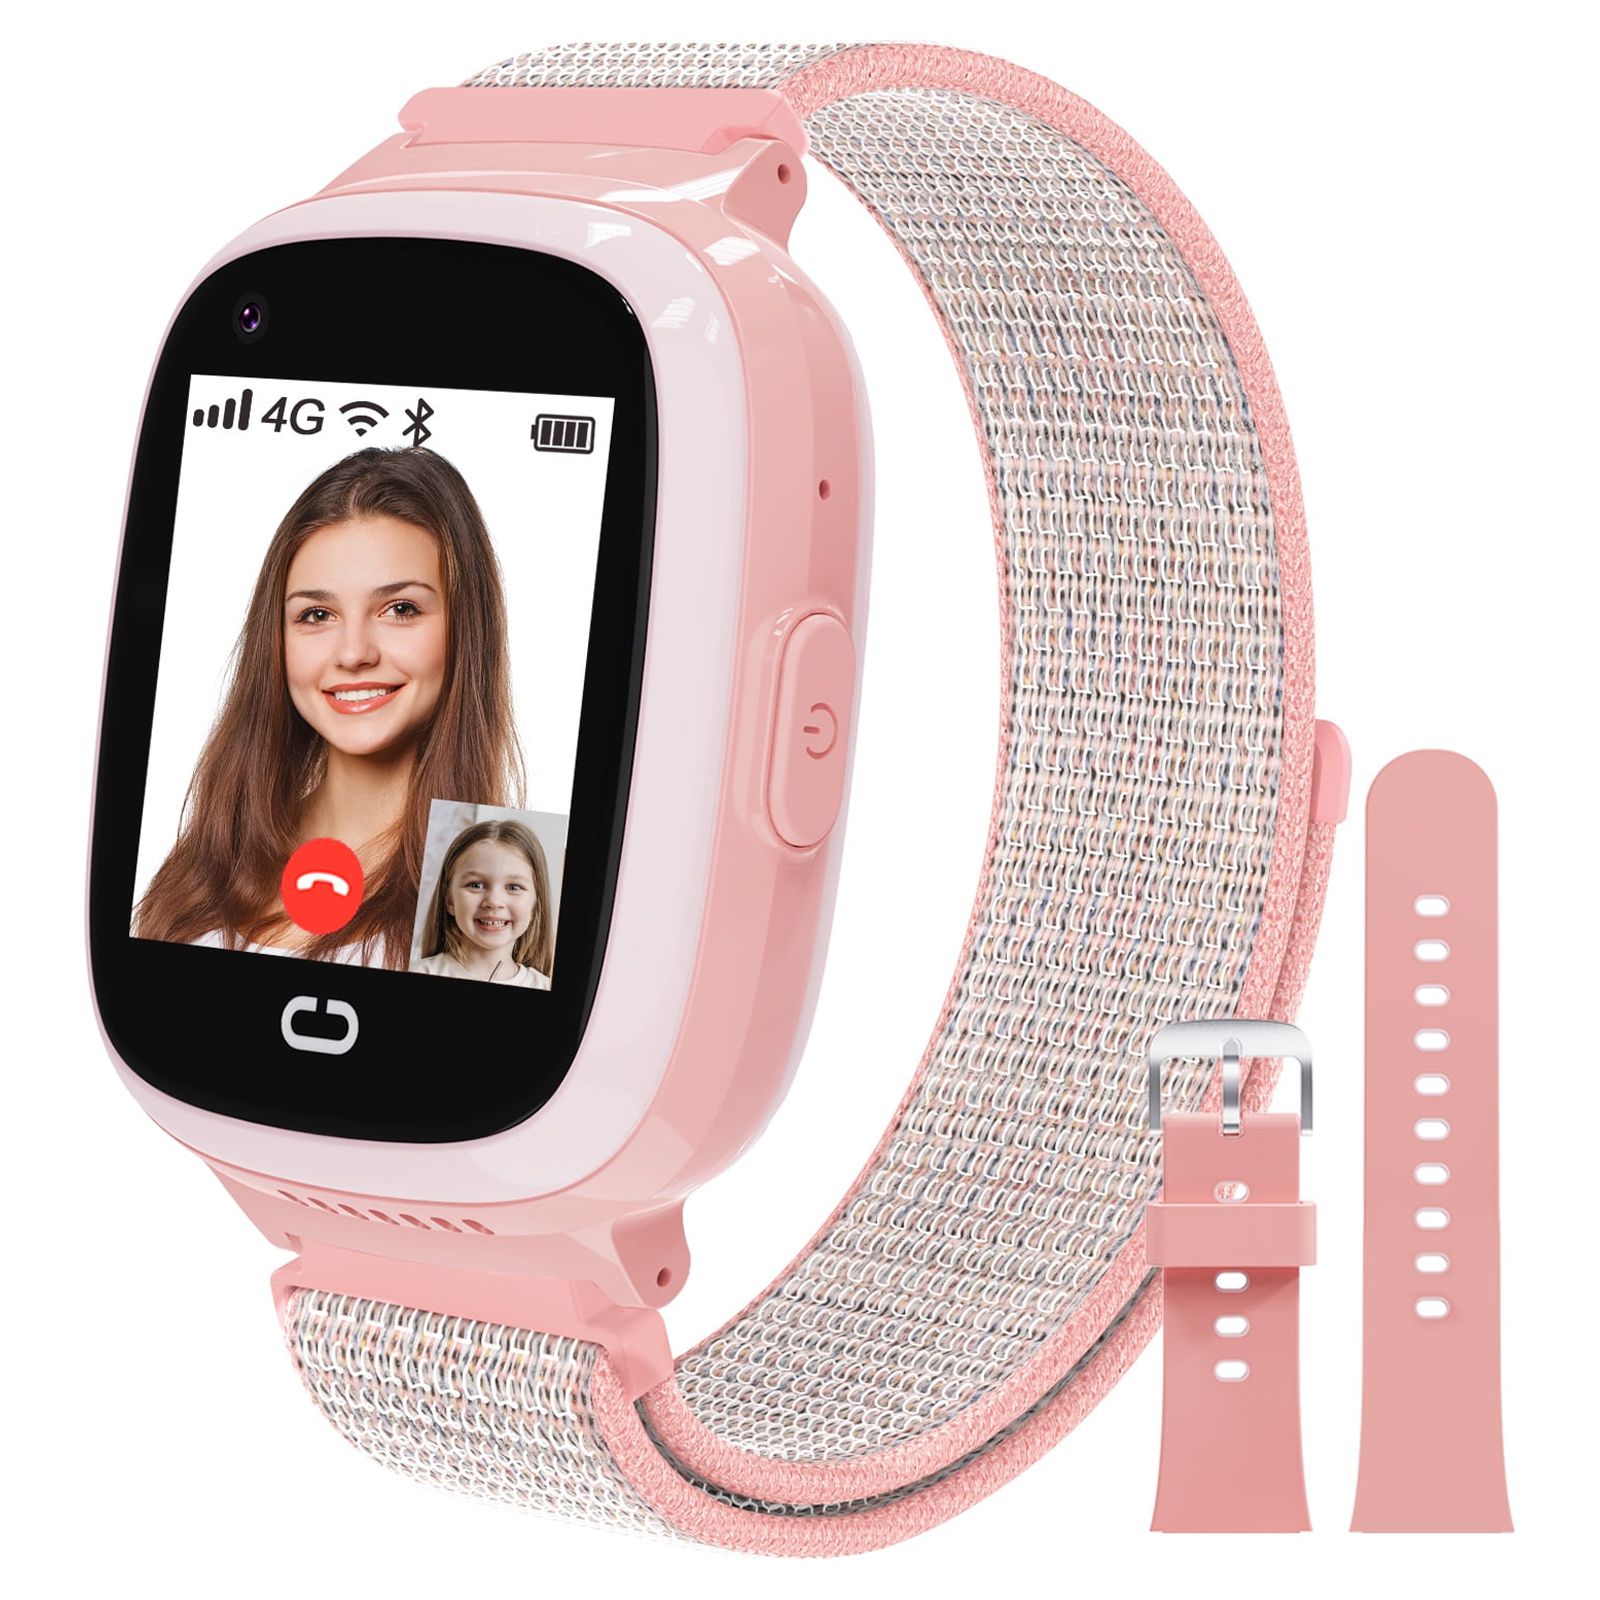 PTHTECHUS Smartwatch for Kids with GPS 4G HD Touchscreen Watch with Phone GPS Tracker Real-Time Location SOS Video Call Voice Chat Camera for Boys Girls Gift Pink - image 1 of 10